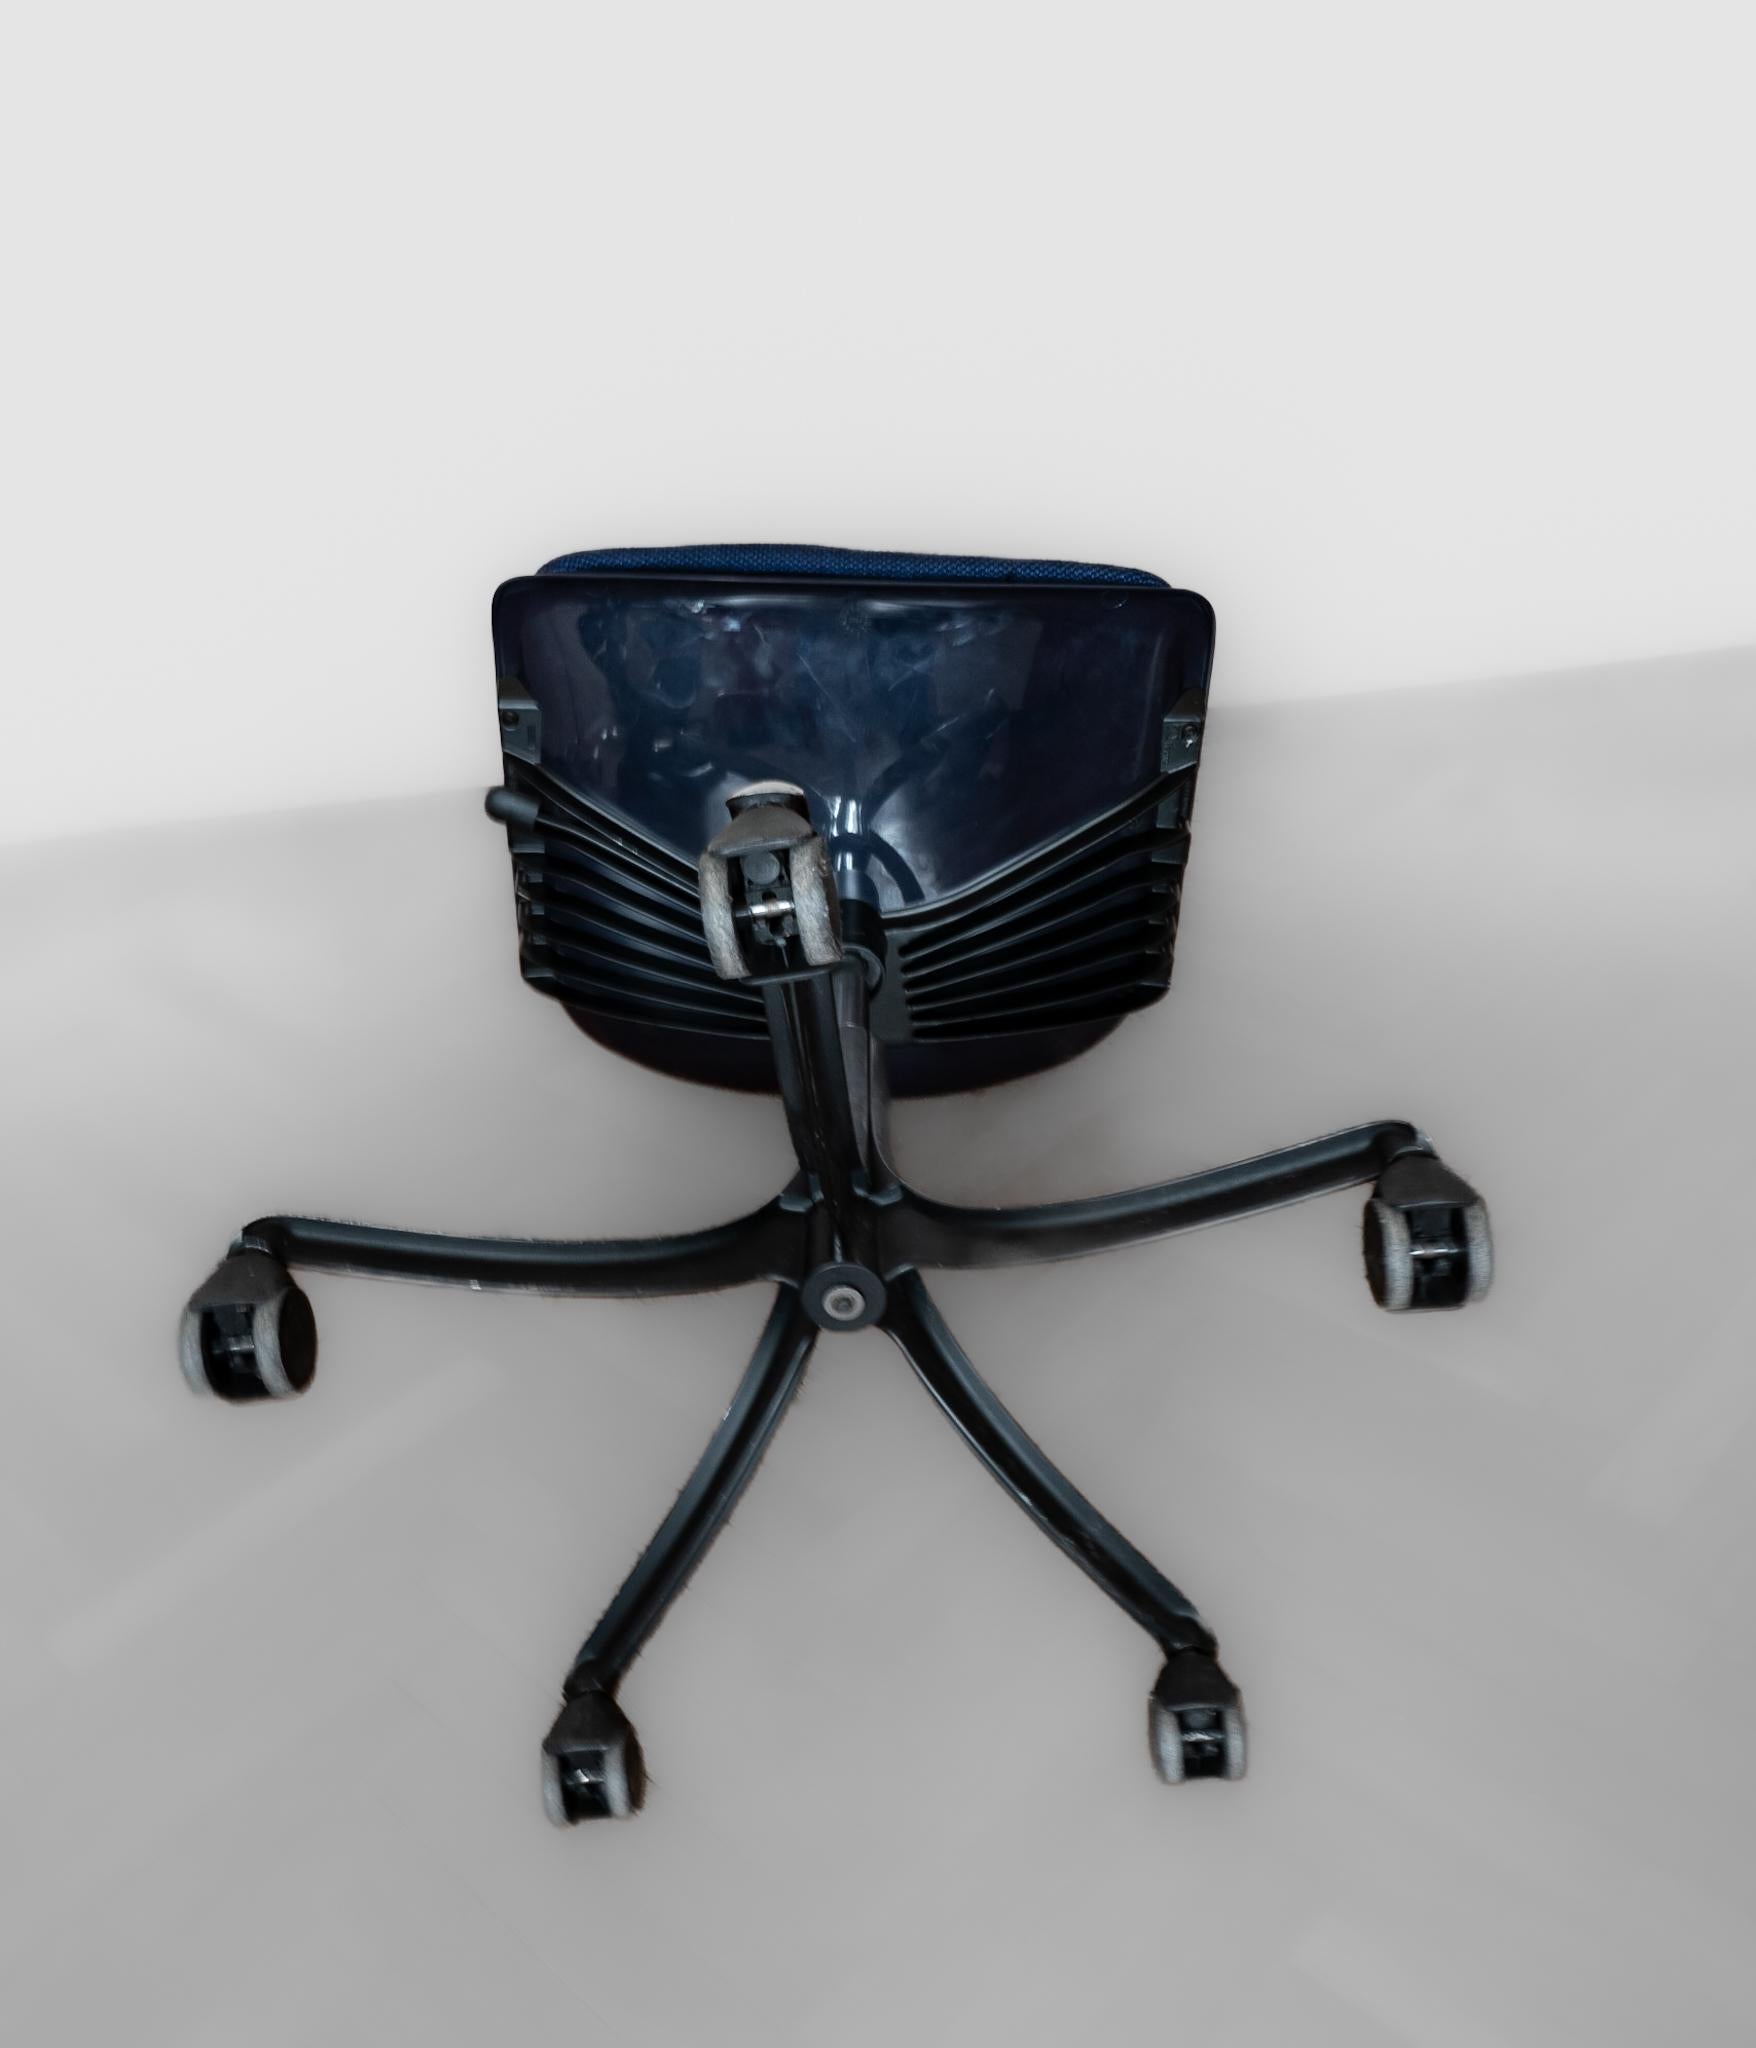 Mid-Century Modern Dark Blue Office Chair Modus 5 by Osvaldo Borsani, Italy 1970s.

Elevate your office space with the timeless Italian office sviwel chair “Modus” by renowned designer Osvaldo Borsani produced by Tecno in the 70s. This seating